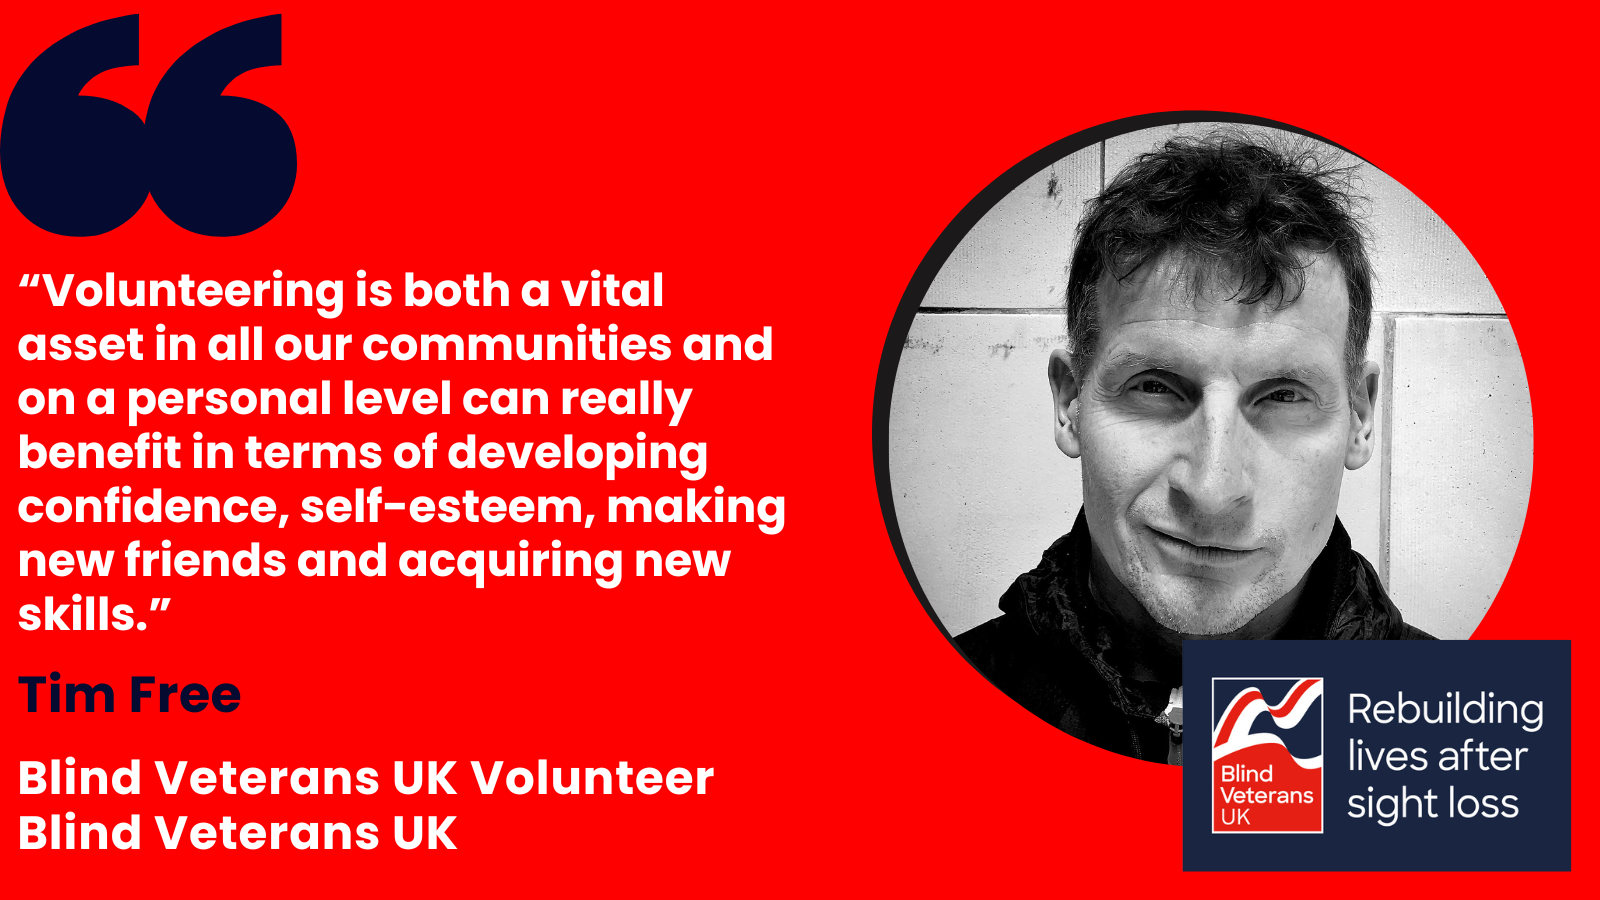 Image with quote from Blind Veterans UK volunteer, Tim Free. Words of quote "Volunteering is both a vital asset in all our communities and on a personal level can really benefit in terms of developing confidence, self-esteem, making new friends and acquiring new skills""